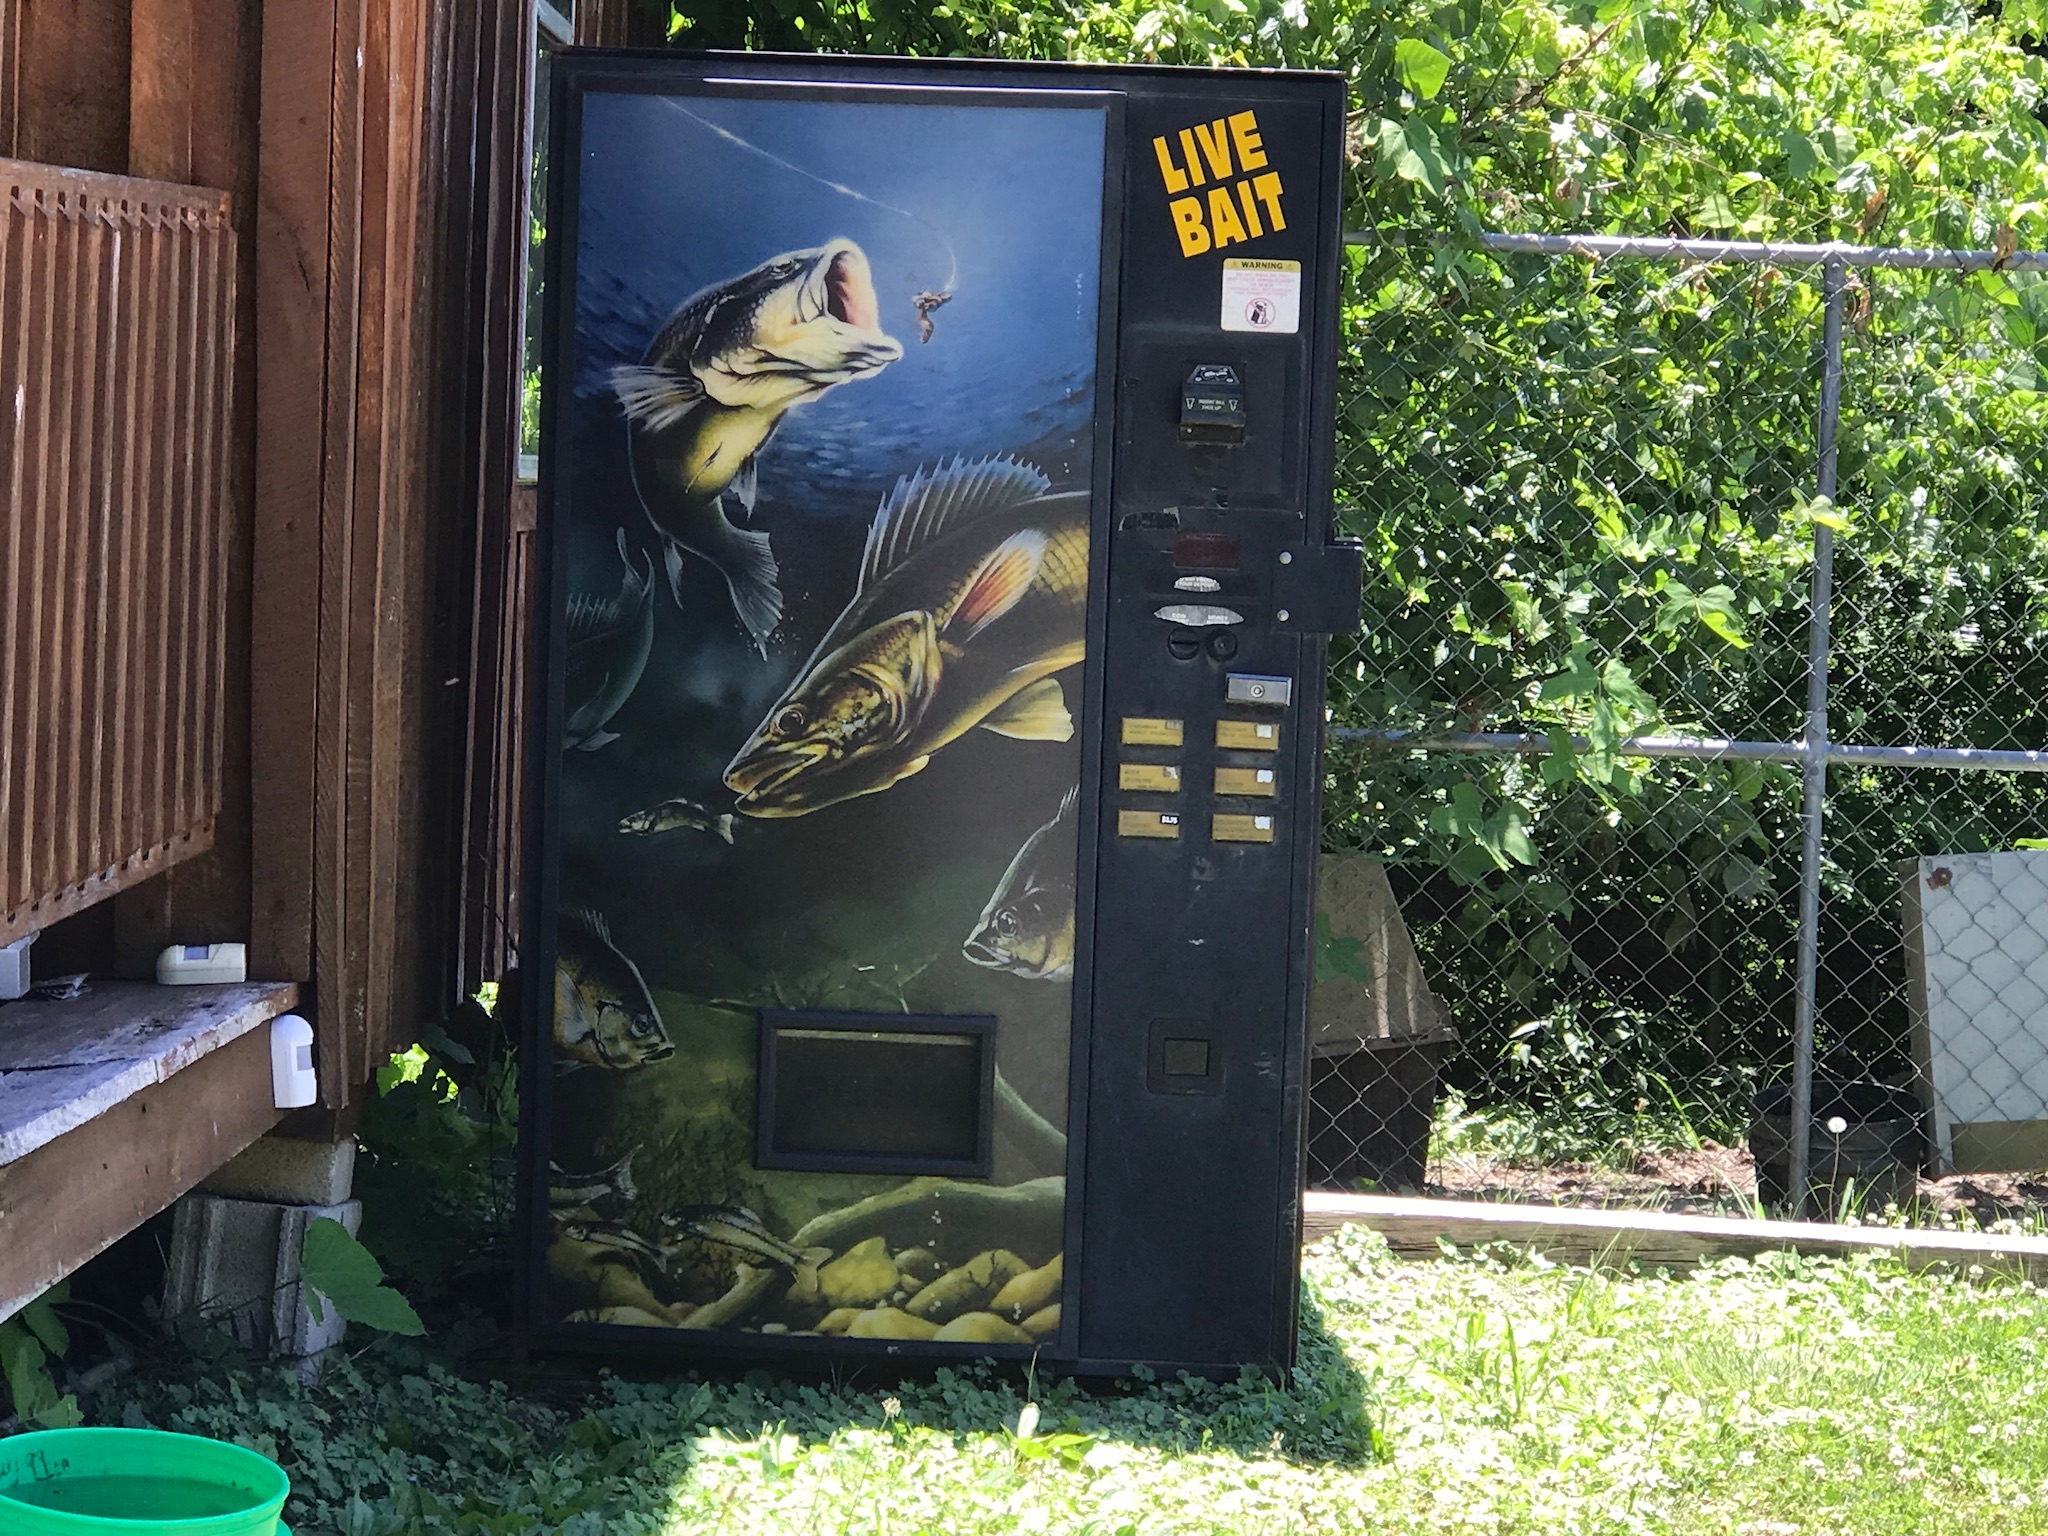 A live bait vending machine in Hyden, Kentucky.  Photo taken by and the property of FourWalls.